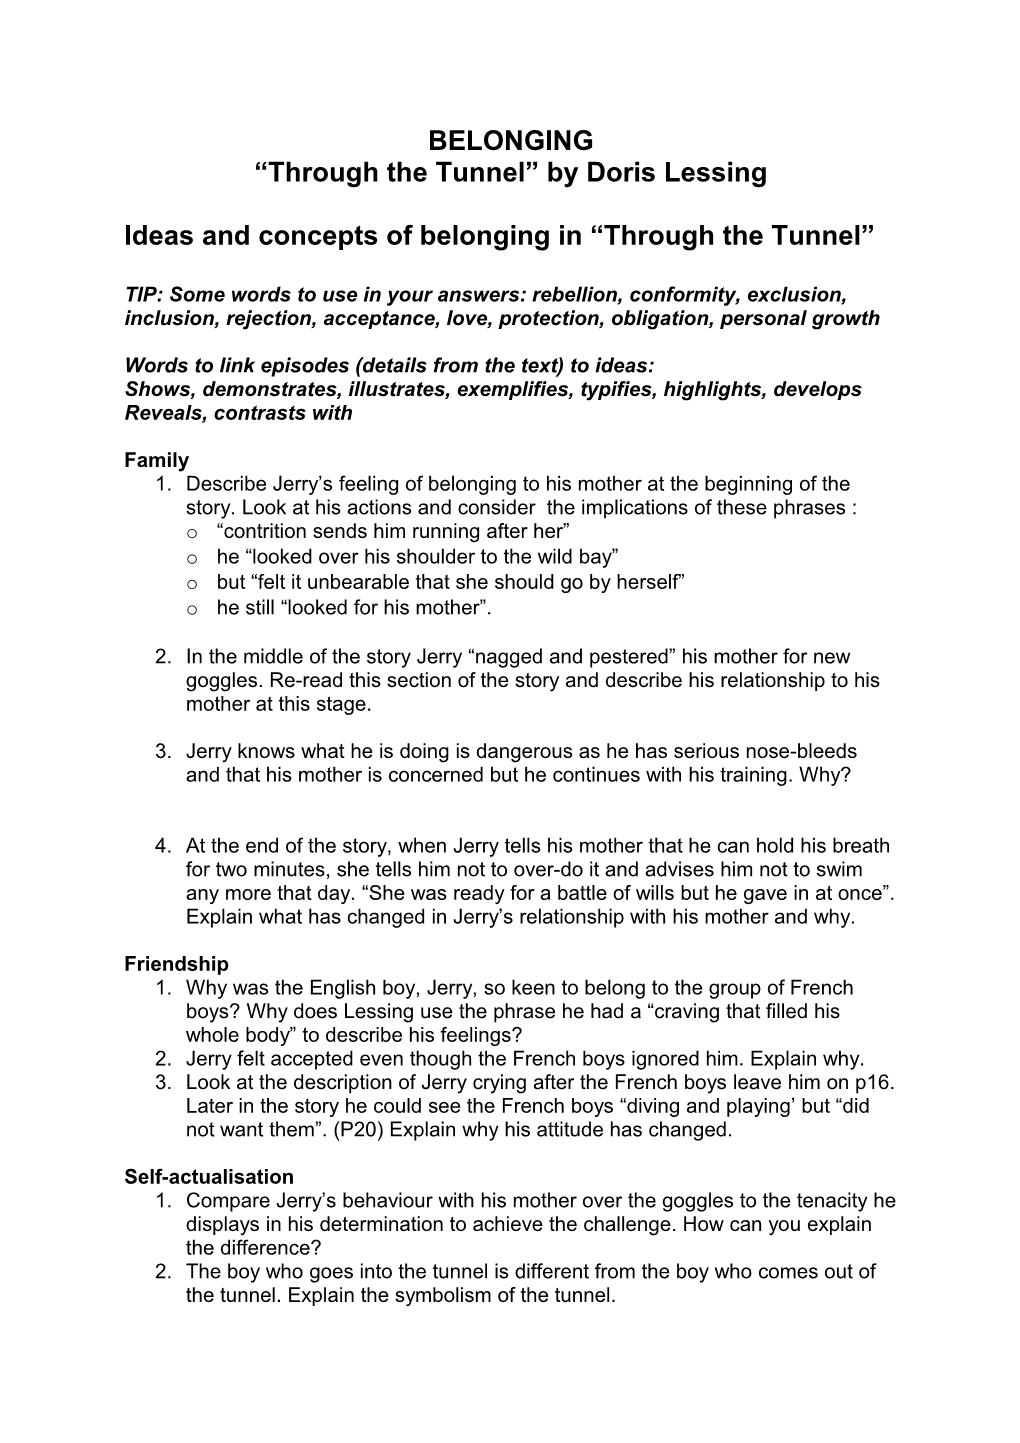 Ideas and Concepts of Belonging in Through the Tunnel